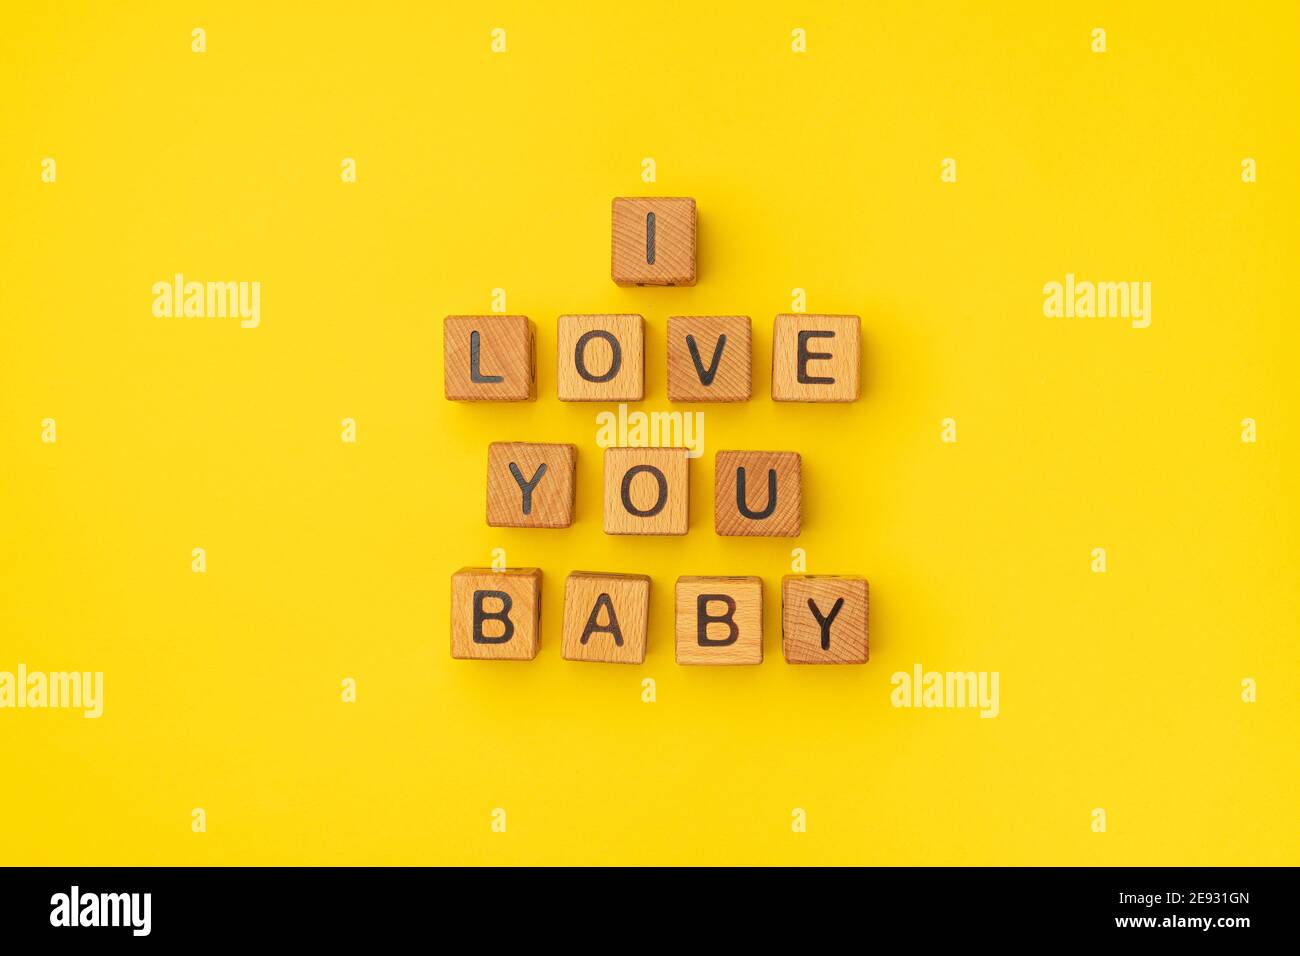 Wooden Cubes With The Phrase I Love You Baby On An Empty Colorful Yellow Background Words Of Love Are Made Of Letters From Wood For Your Girlfriend Boyfriend Wife Husband For Valentine S